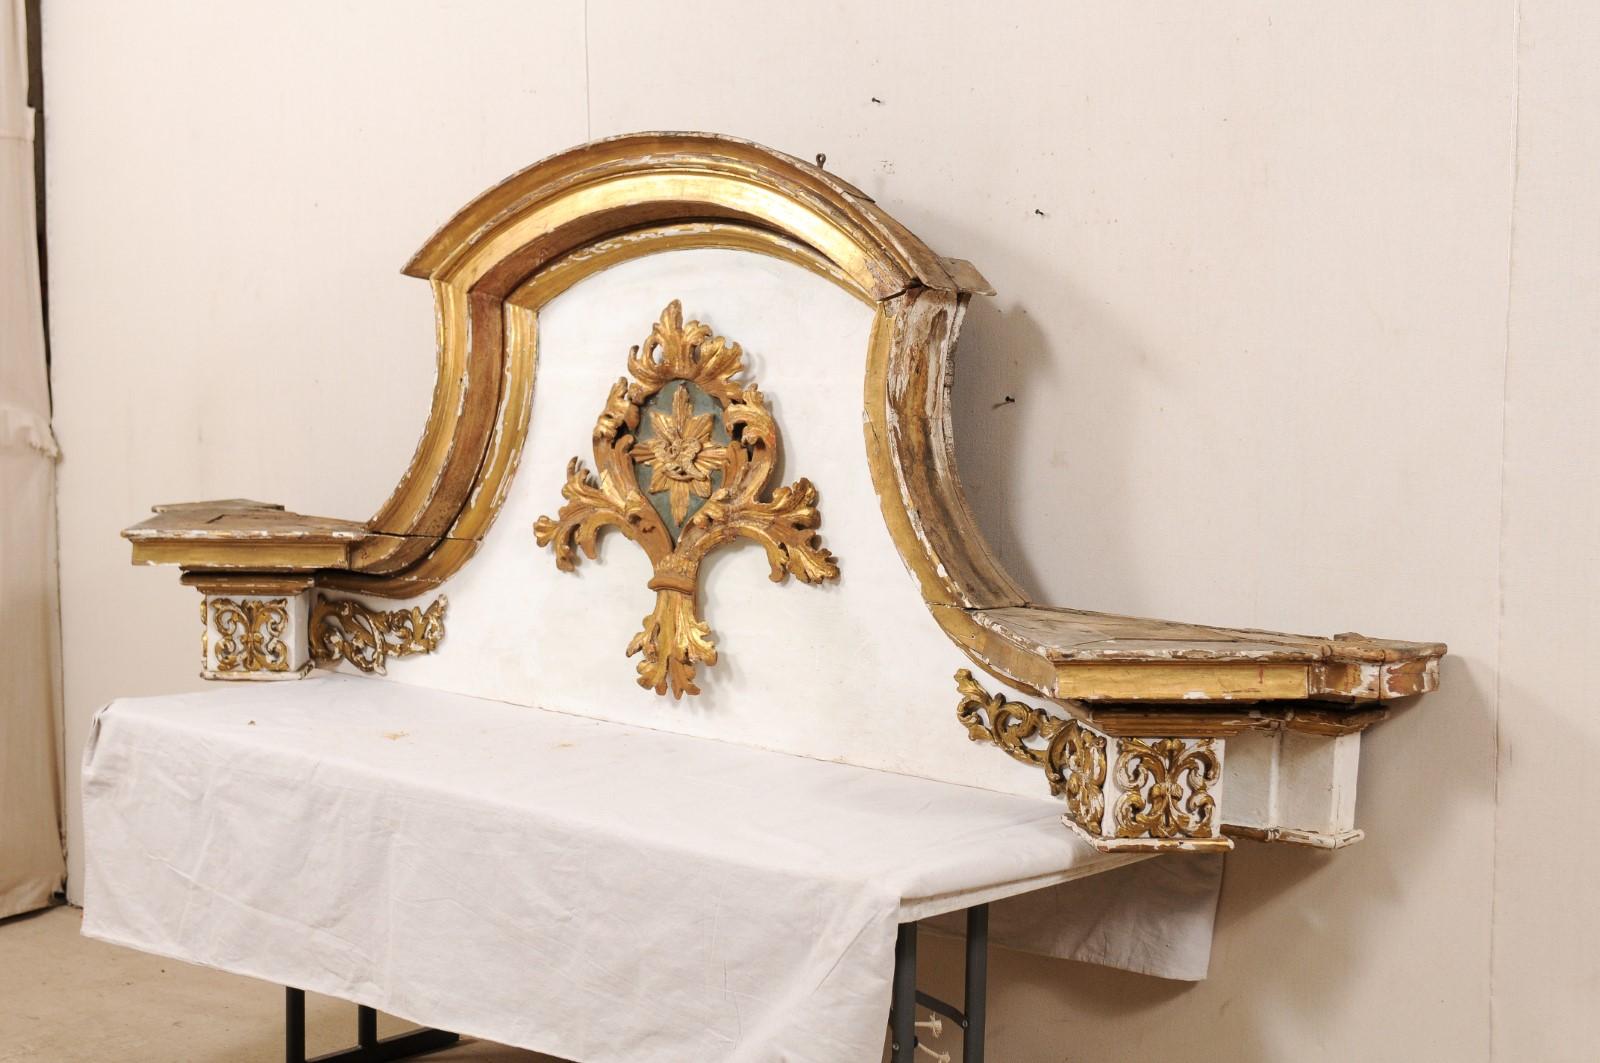 Impressive 18th Century Italian Carved, Gilded & Painted Wood Pediment Fragment For Sale 1